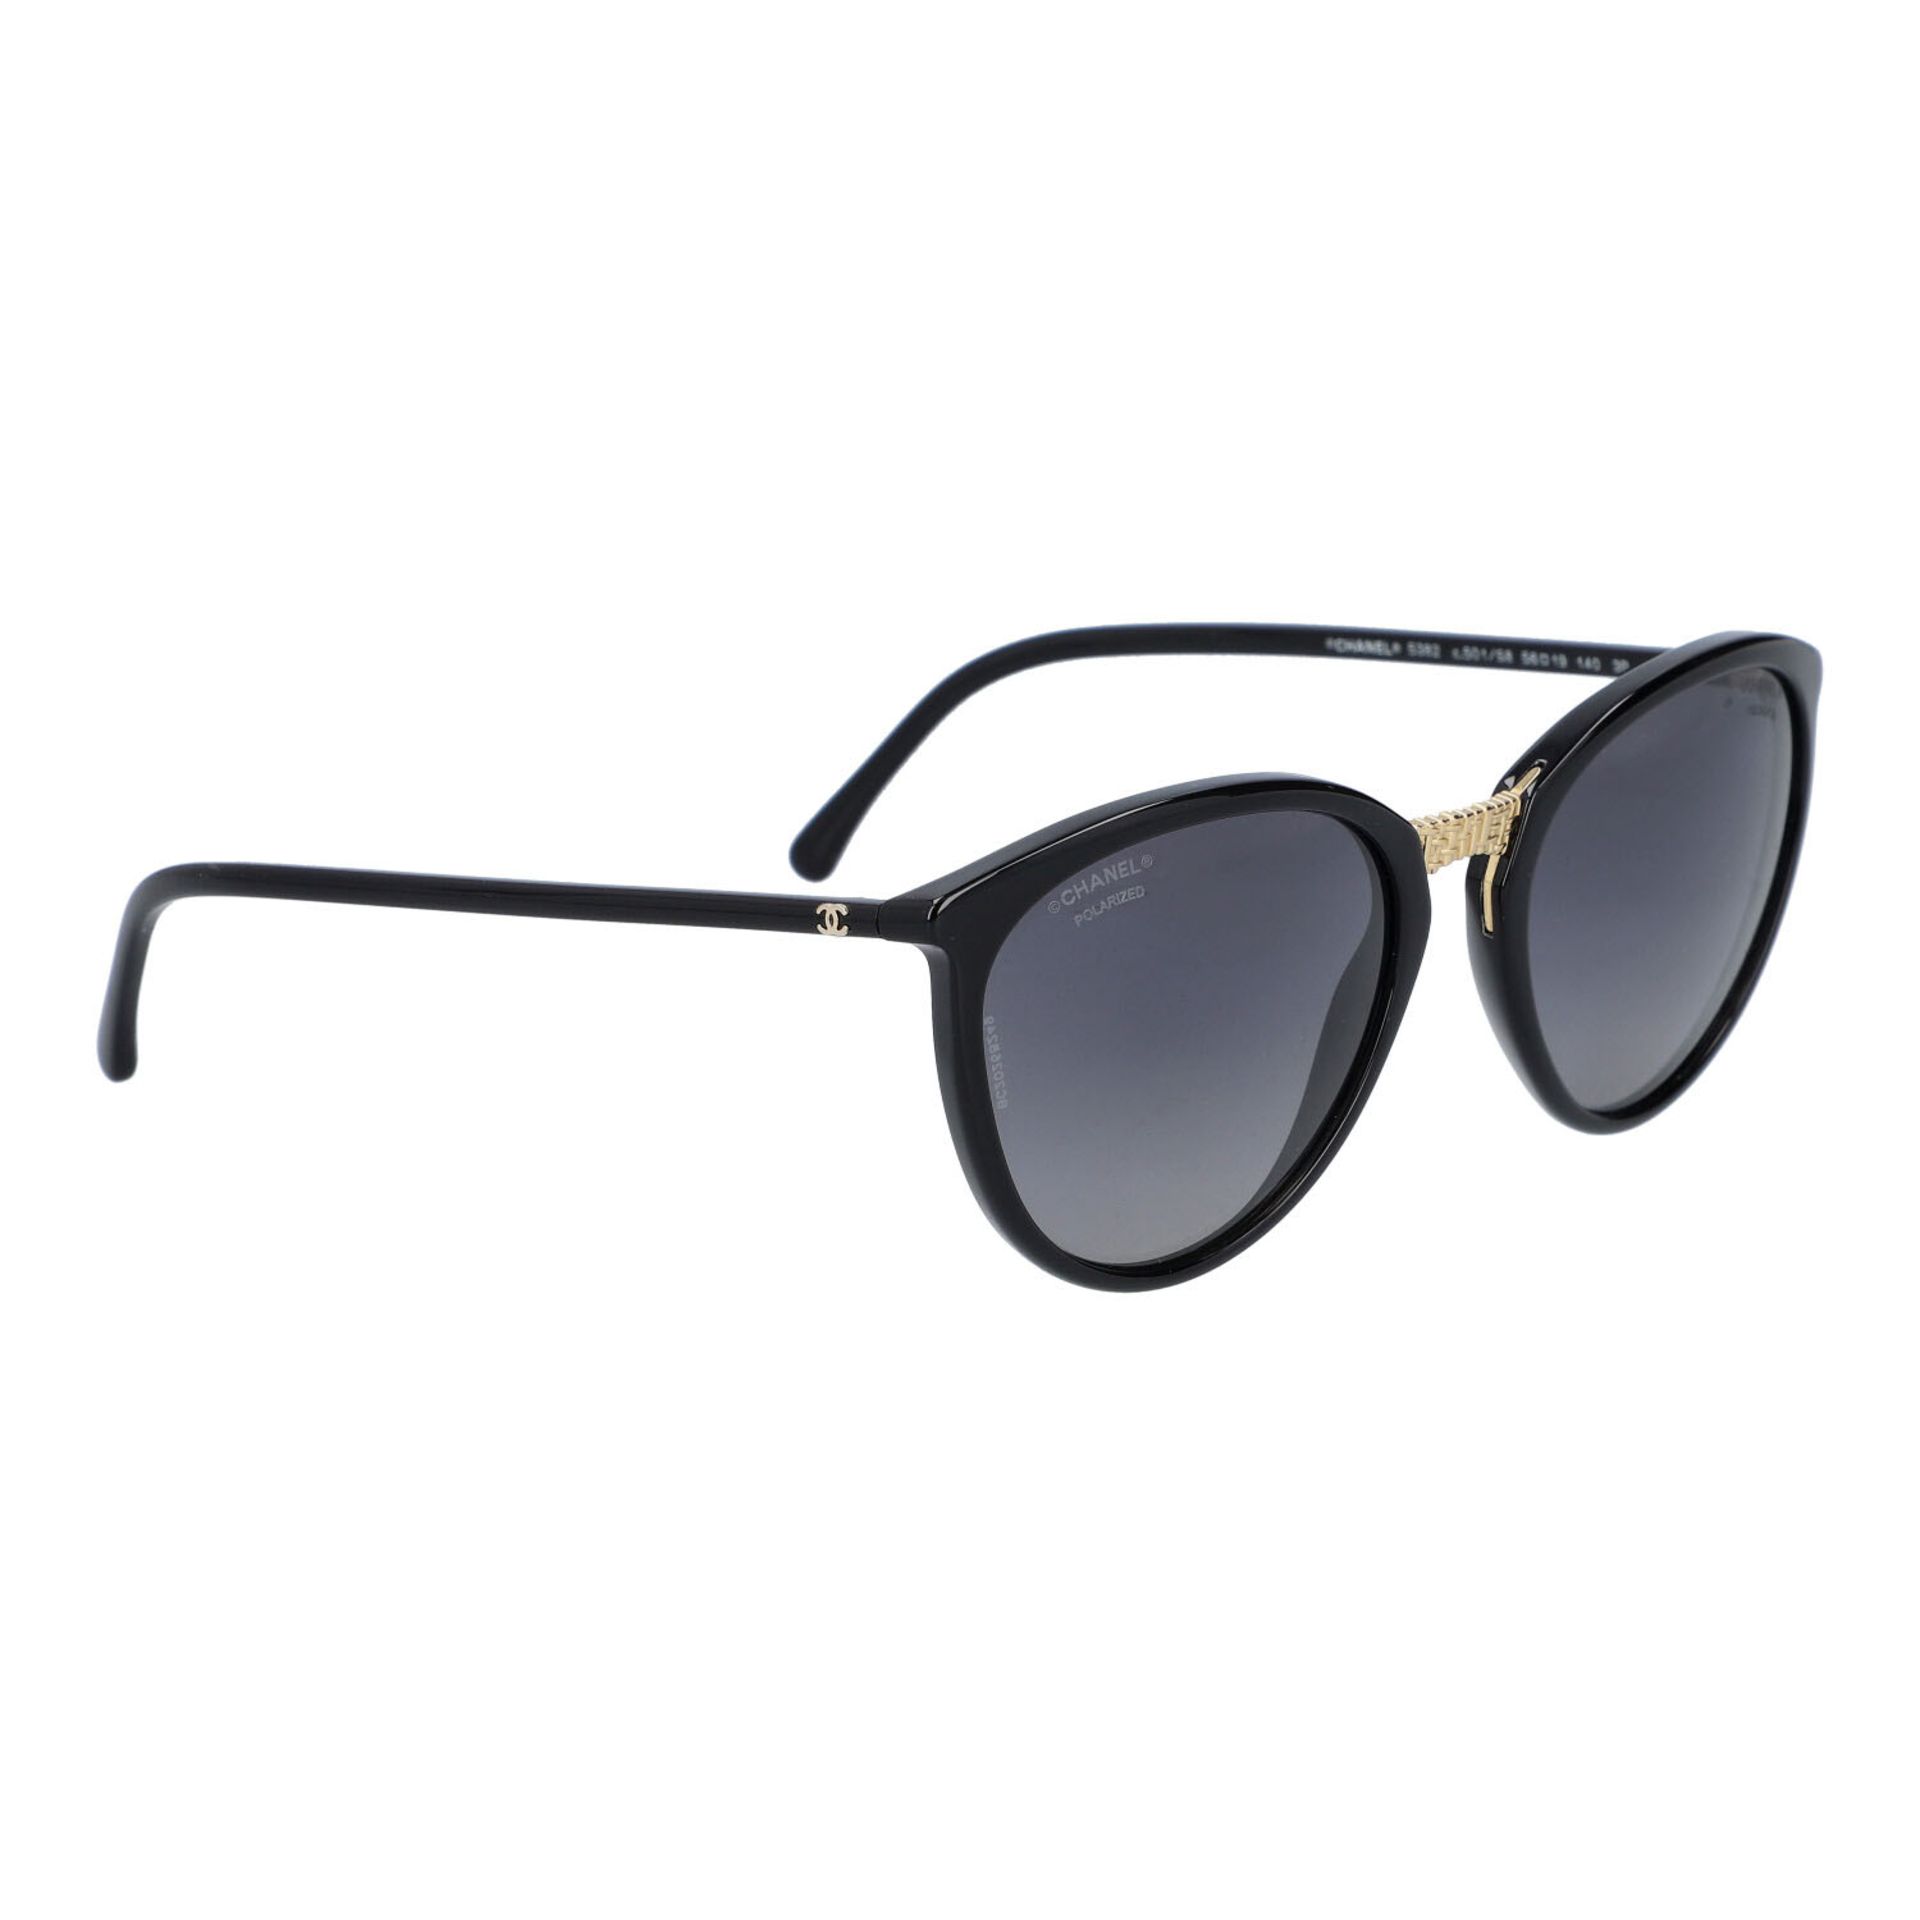 CHANEL Sonnenbrille "c.501/S8". - Image 2 of 5